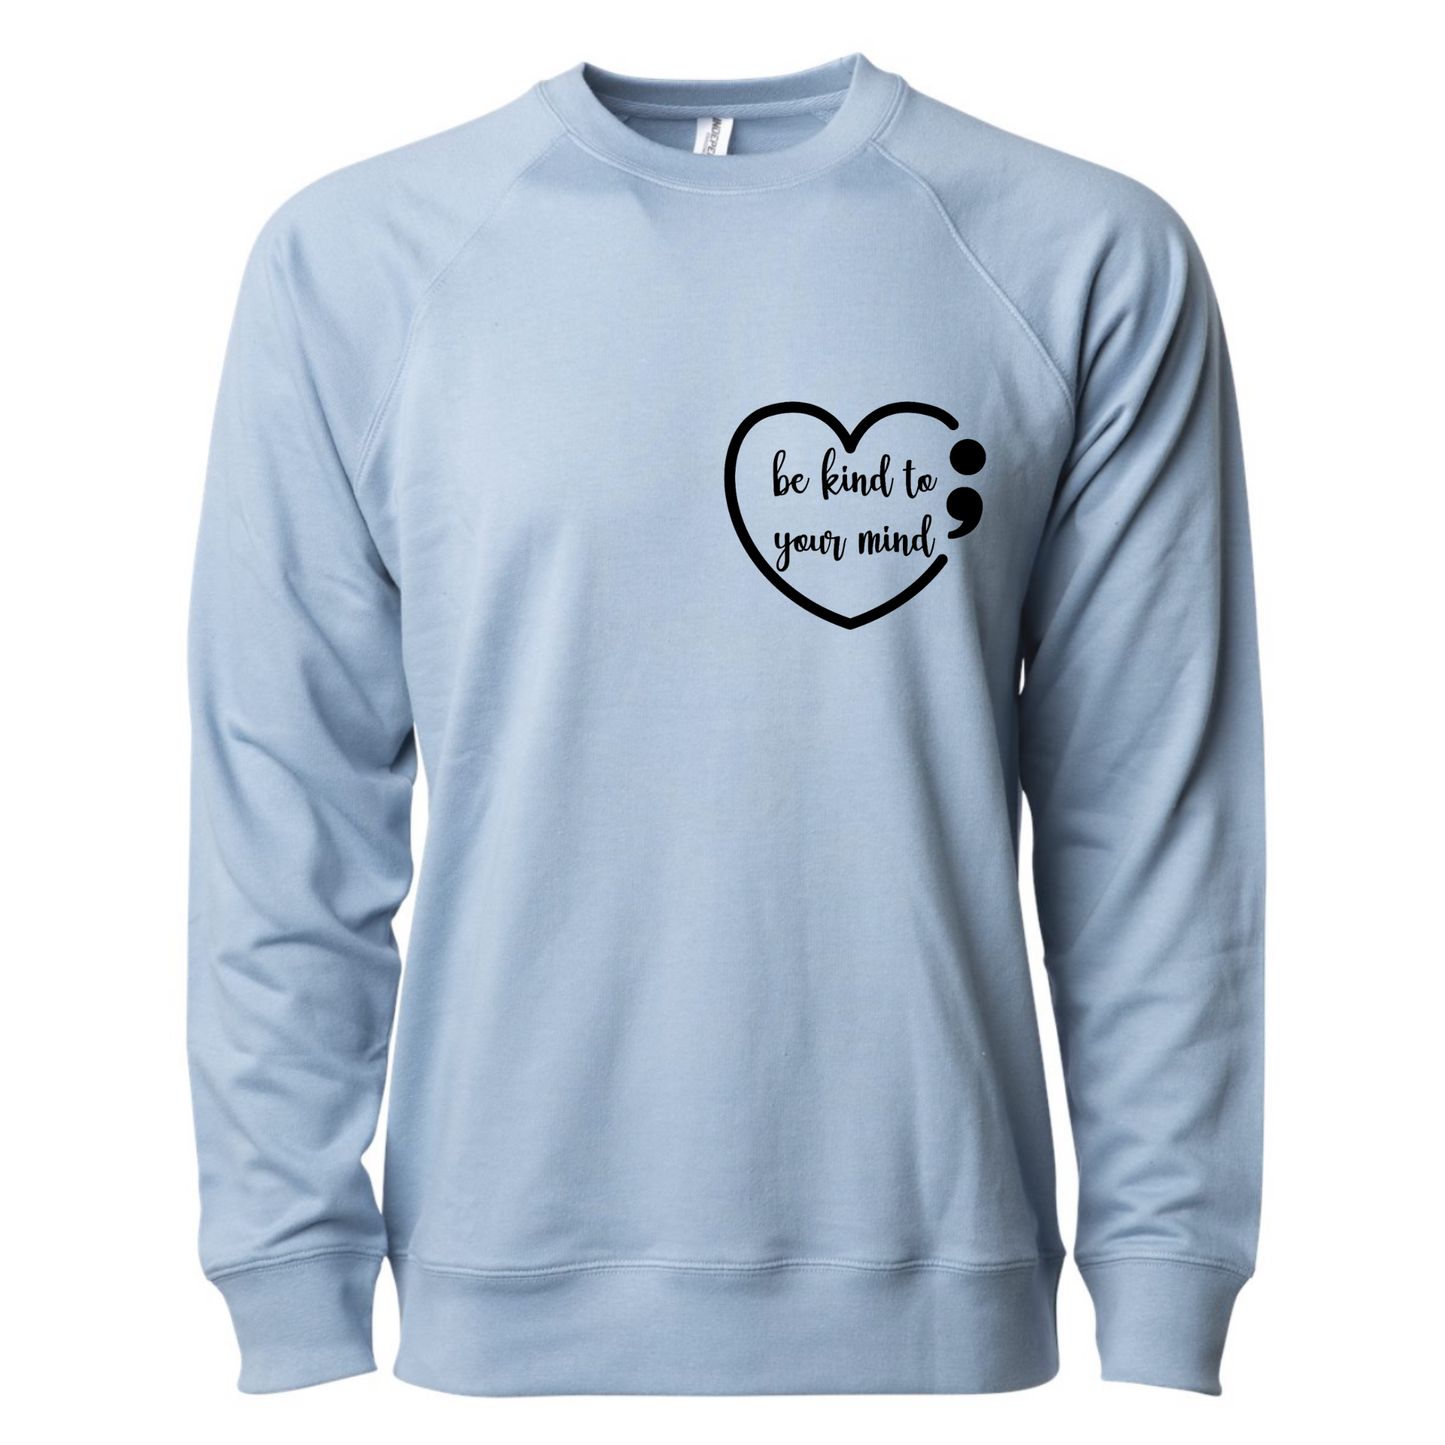 Dear Person Behind Me - Pull Over Sweatshirt in light blue. Designs are in black. The back says "Dear person behind me, the world is a better place with you in it. Love the person in front of you" in a cursive design. The front design is on the right hand side, as a small pocket square with the saying "be kind to your mind" in cursive with a heart and semi colon surrounding it. This is the front view of the sweatshirt.